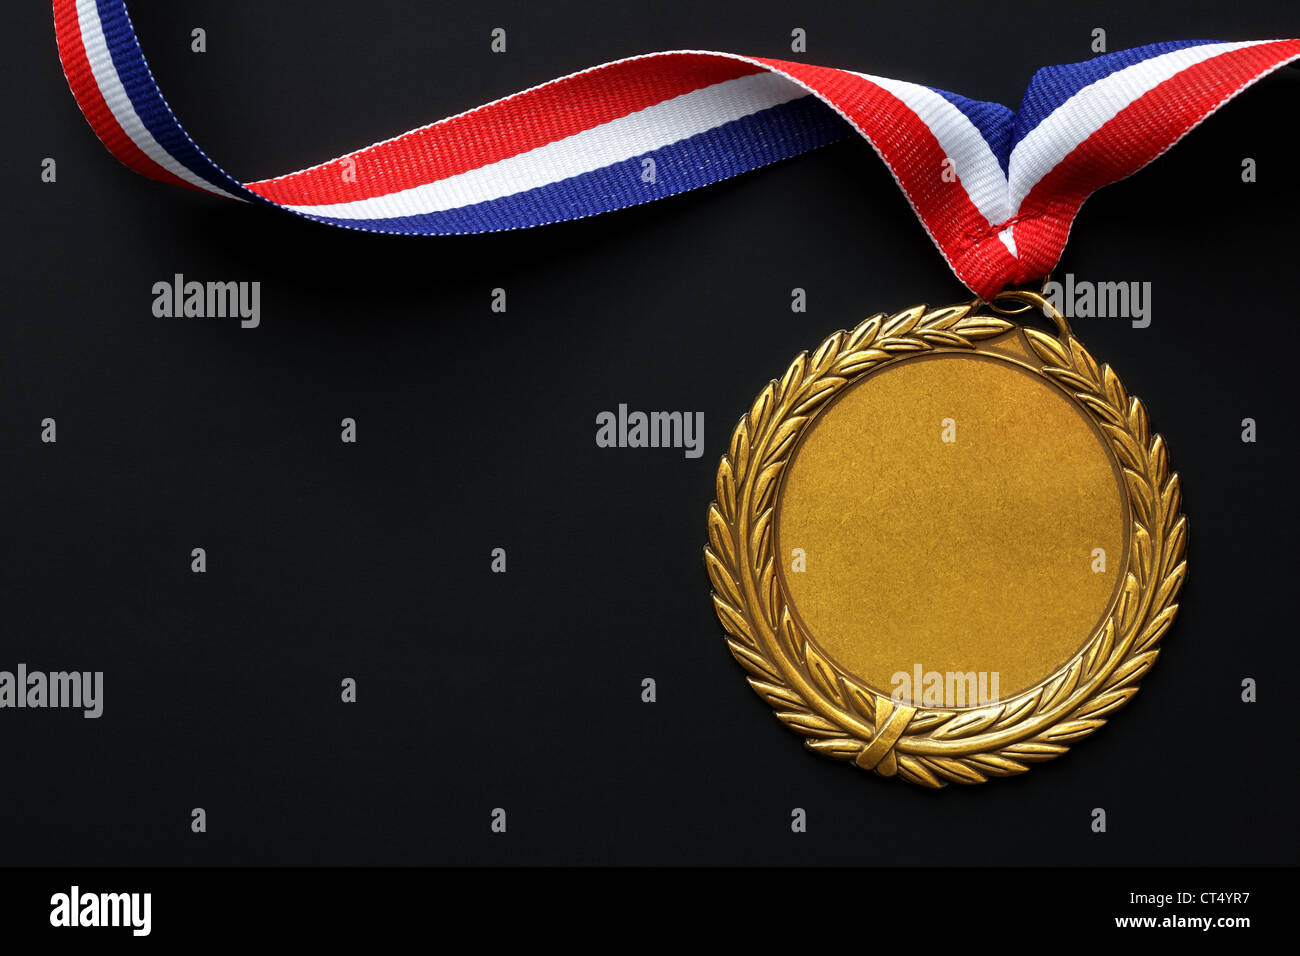 Olympic gold medal Stock Photo